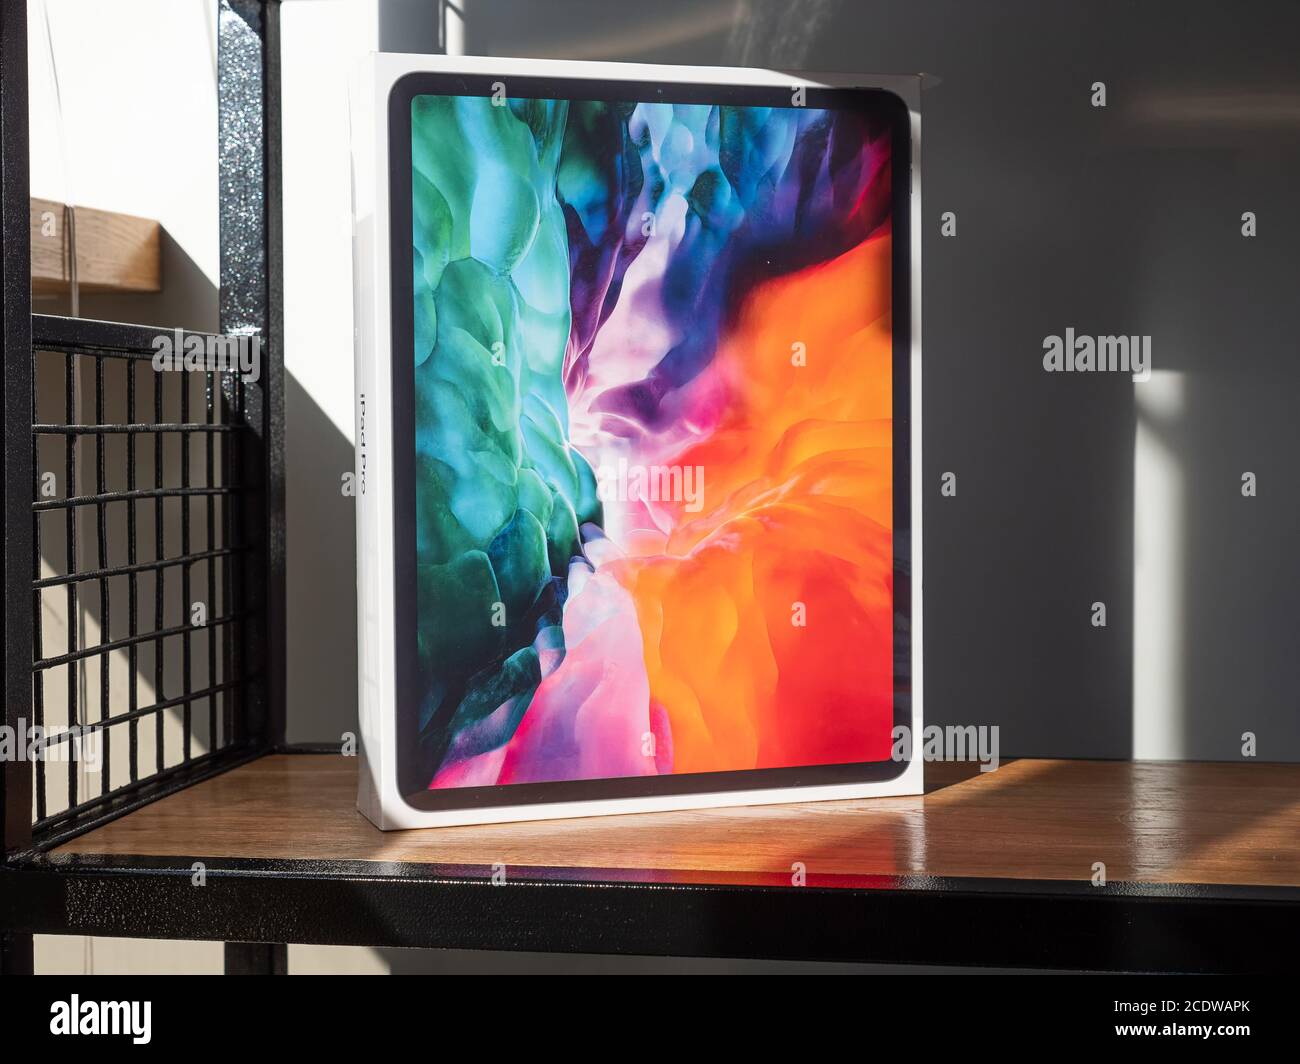 Penza. Russia - August 20, 2020: Packed Apple iPad Pro 2020. Diagonal 12.9 Inches. Tablet Computer on a Wooden Shelf. Stock Photo